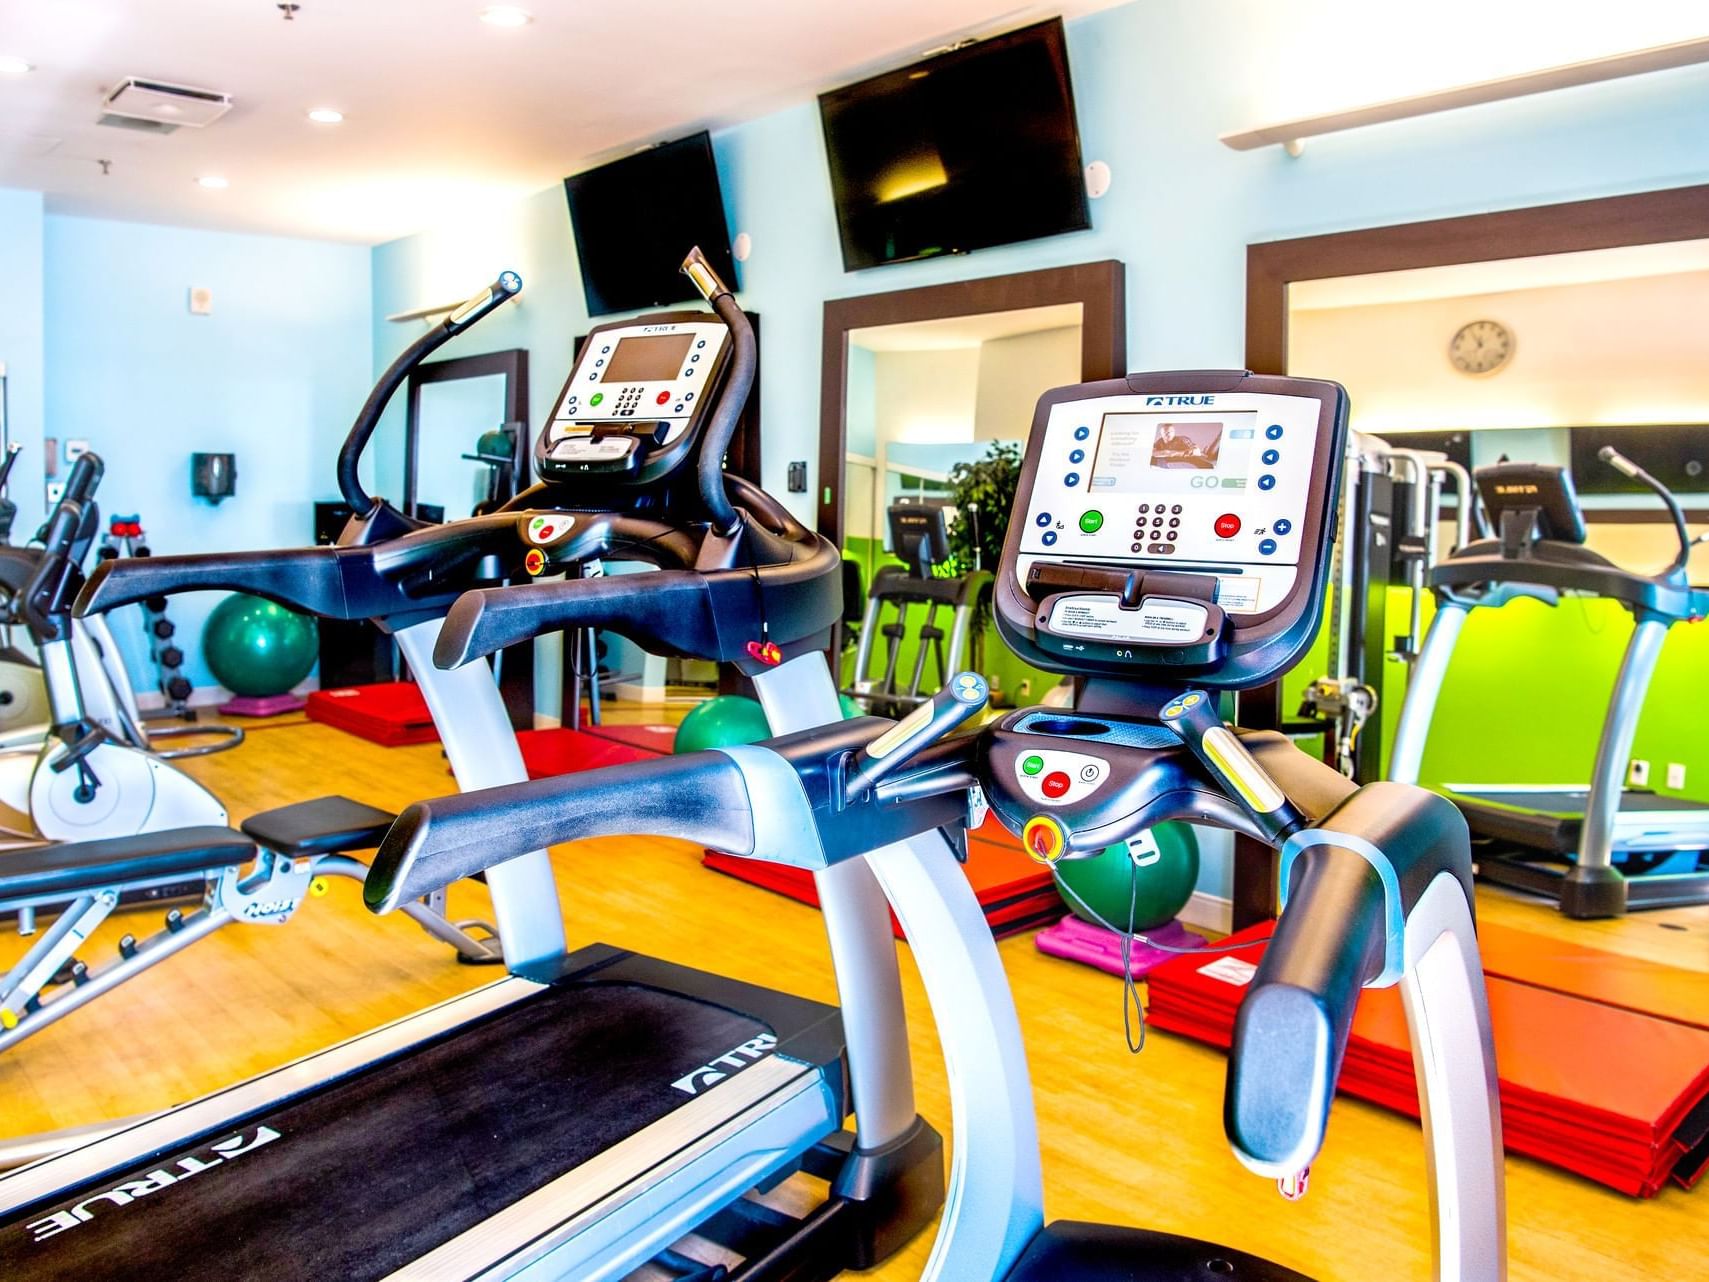 Exercise machines in Fitness Centre at Chateau Vaudreuil